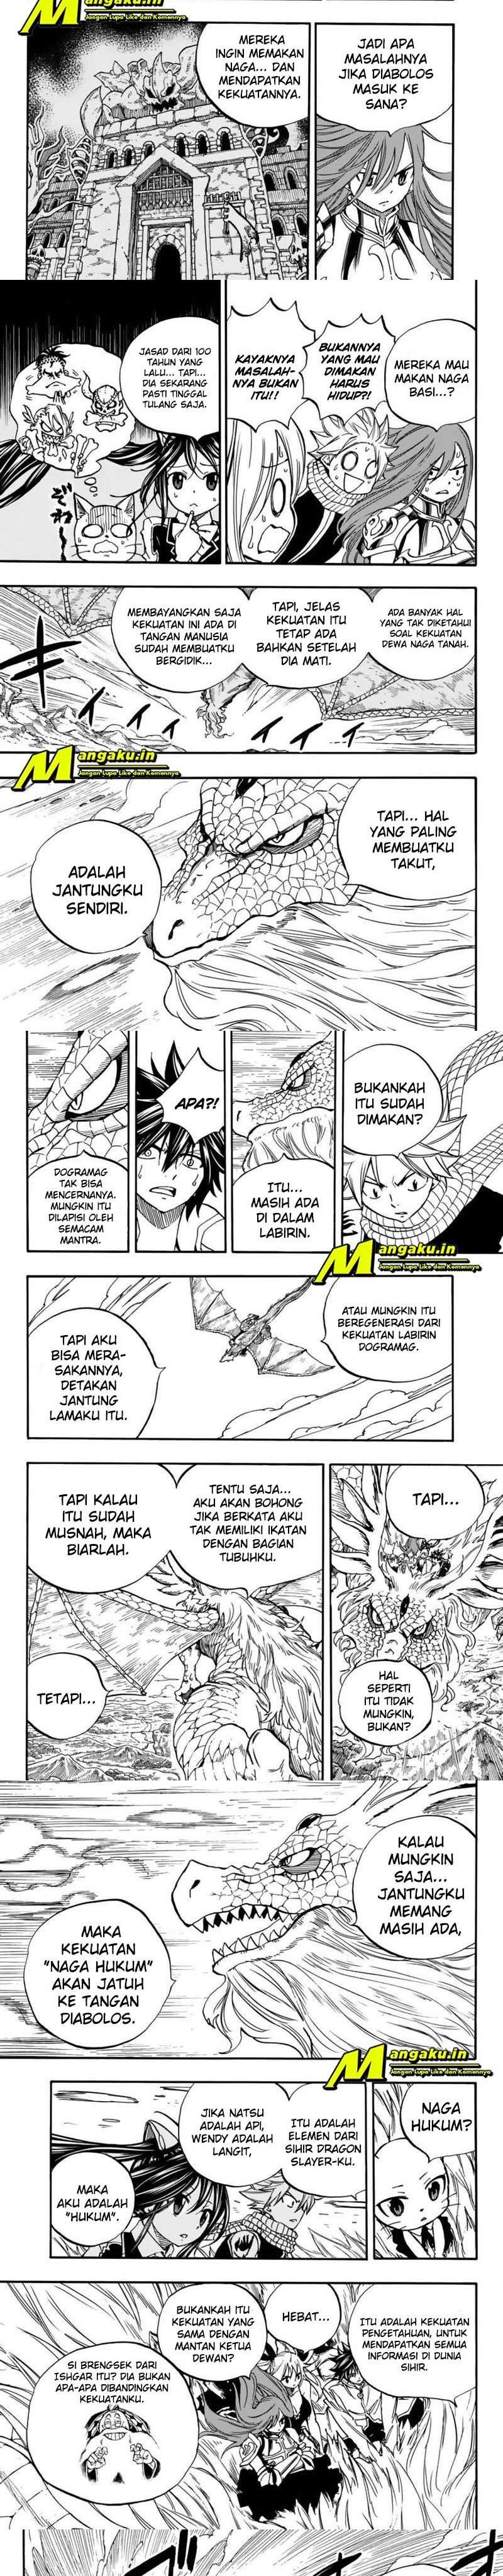 Fairy Tail: 100 Years Quest Chapter 93